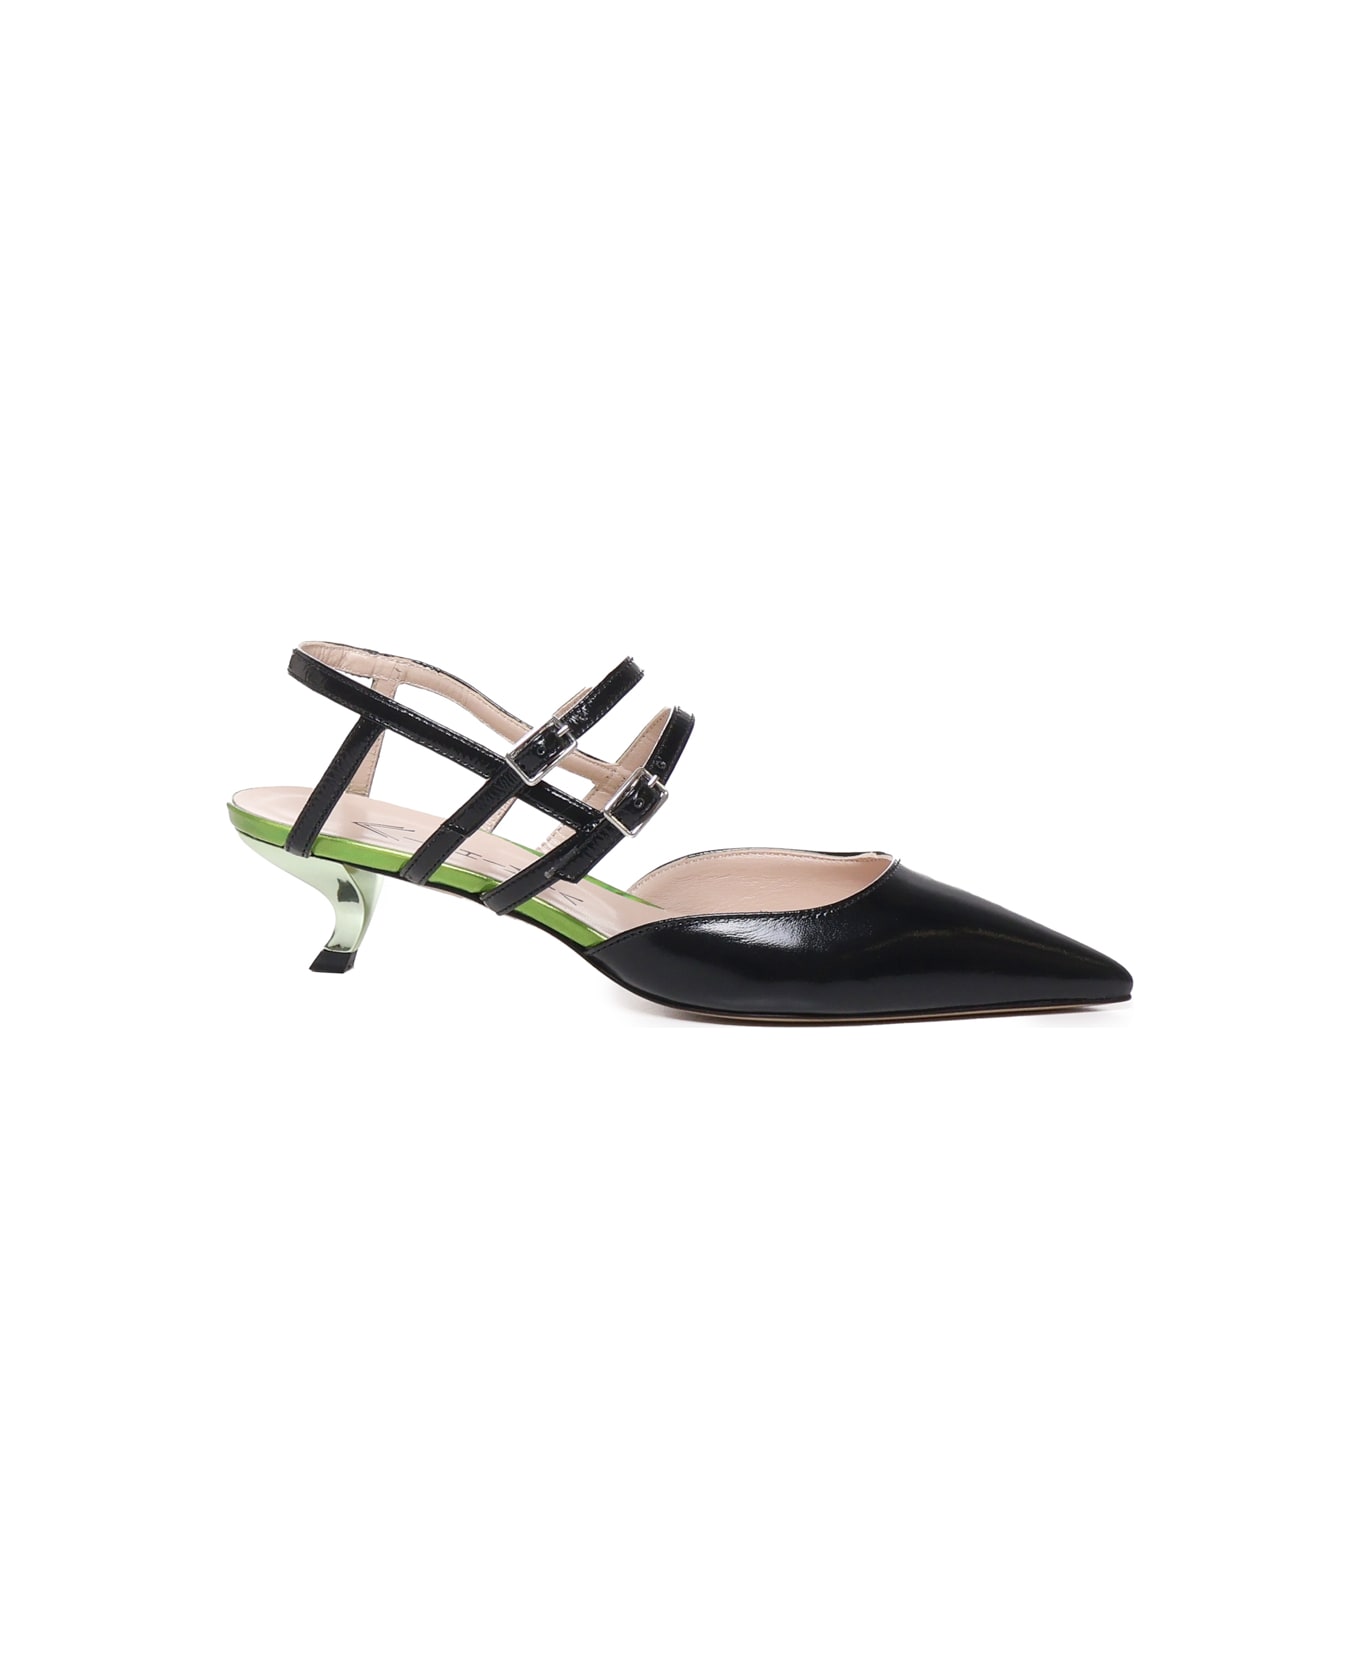 Alchimia Shoes With Toes And Straps - Black, green